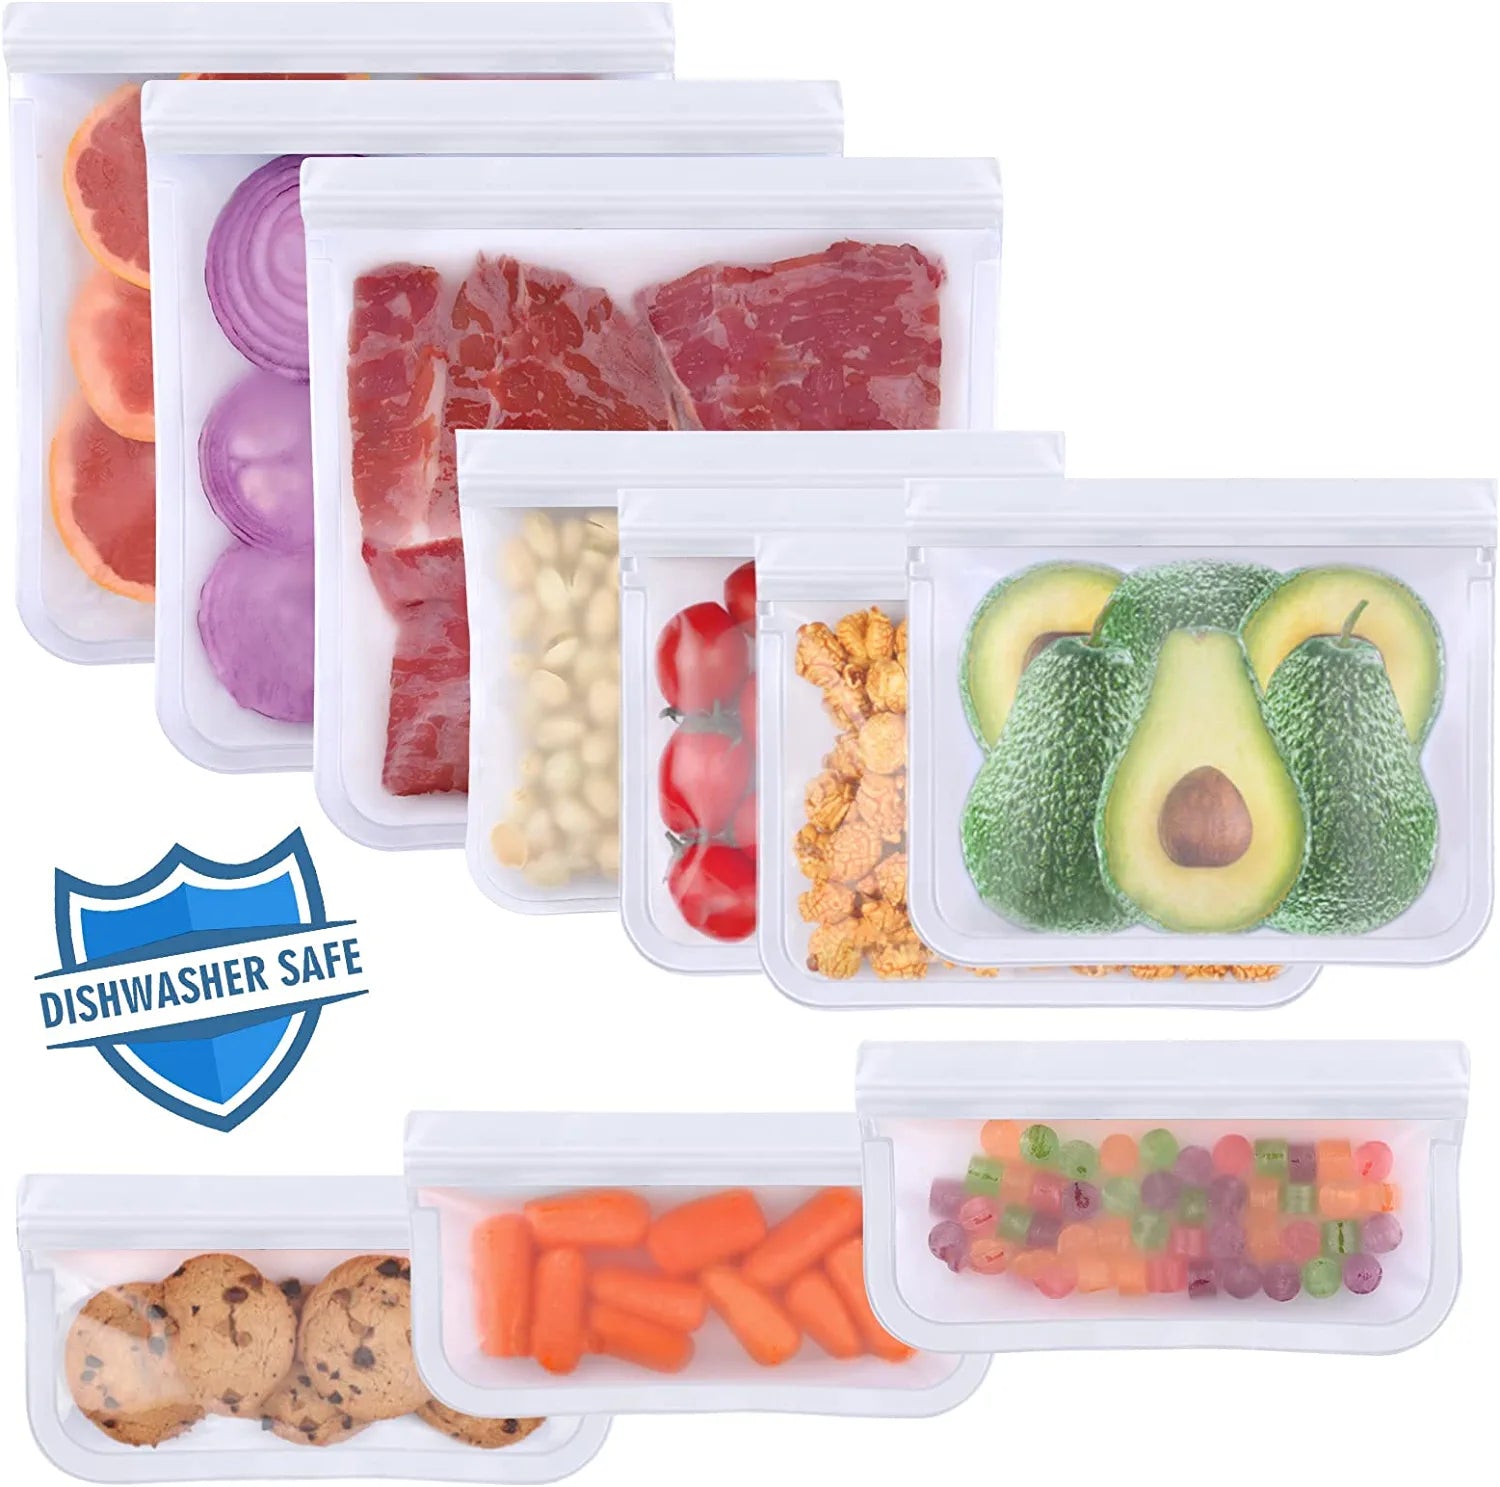 Meetall 9 Pack Reusable Food Storage Bags, 3 Sizes Mixed.3 Gallon Size Bags  for Meats,Fish and Vegetables&3 Sandwich Bags&3 Snack Bags for Kids